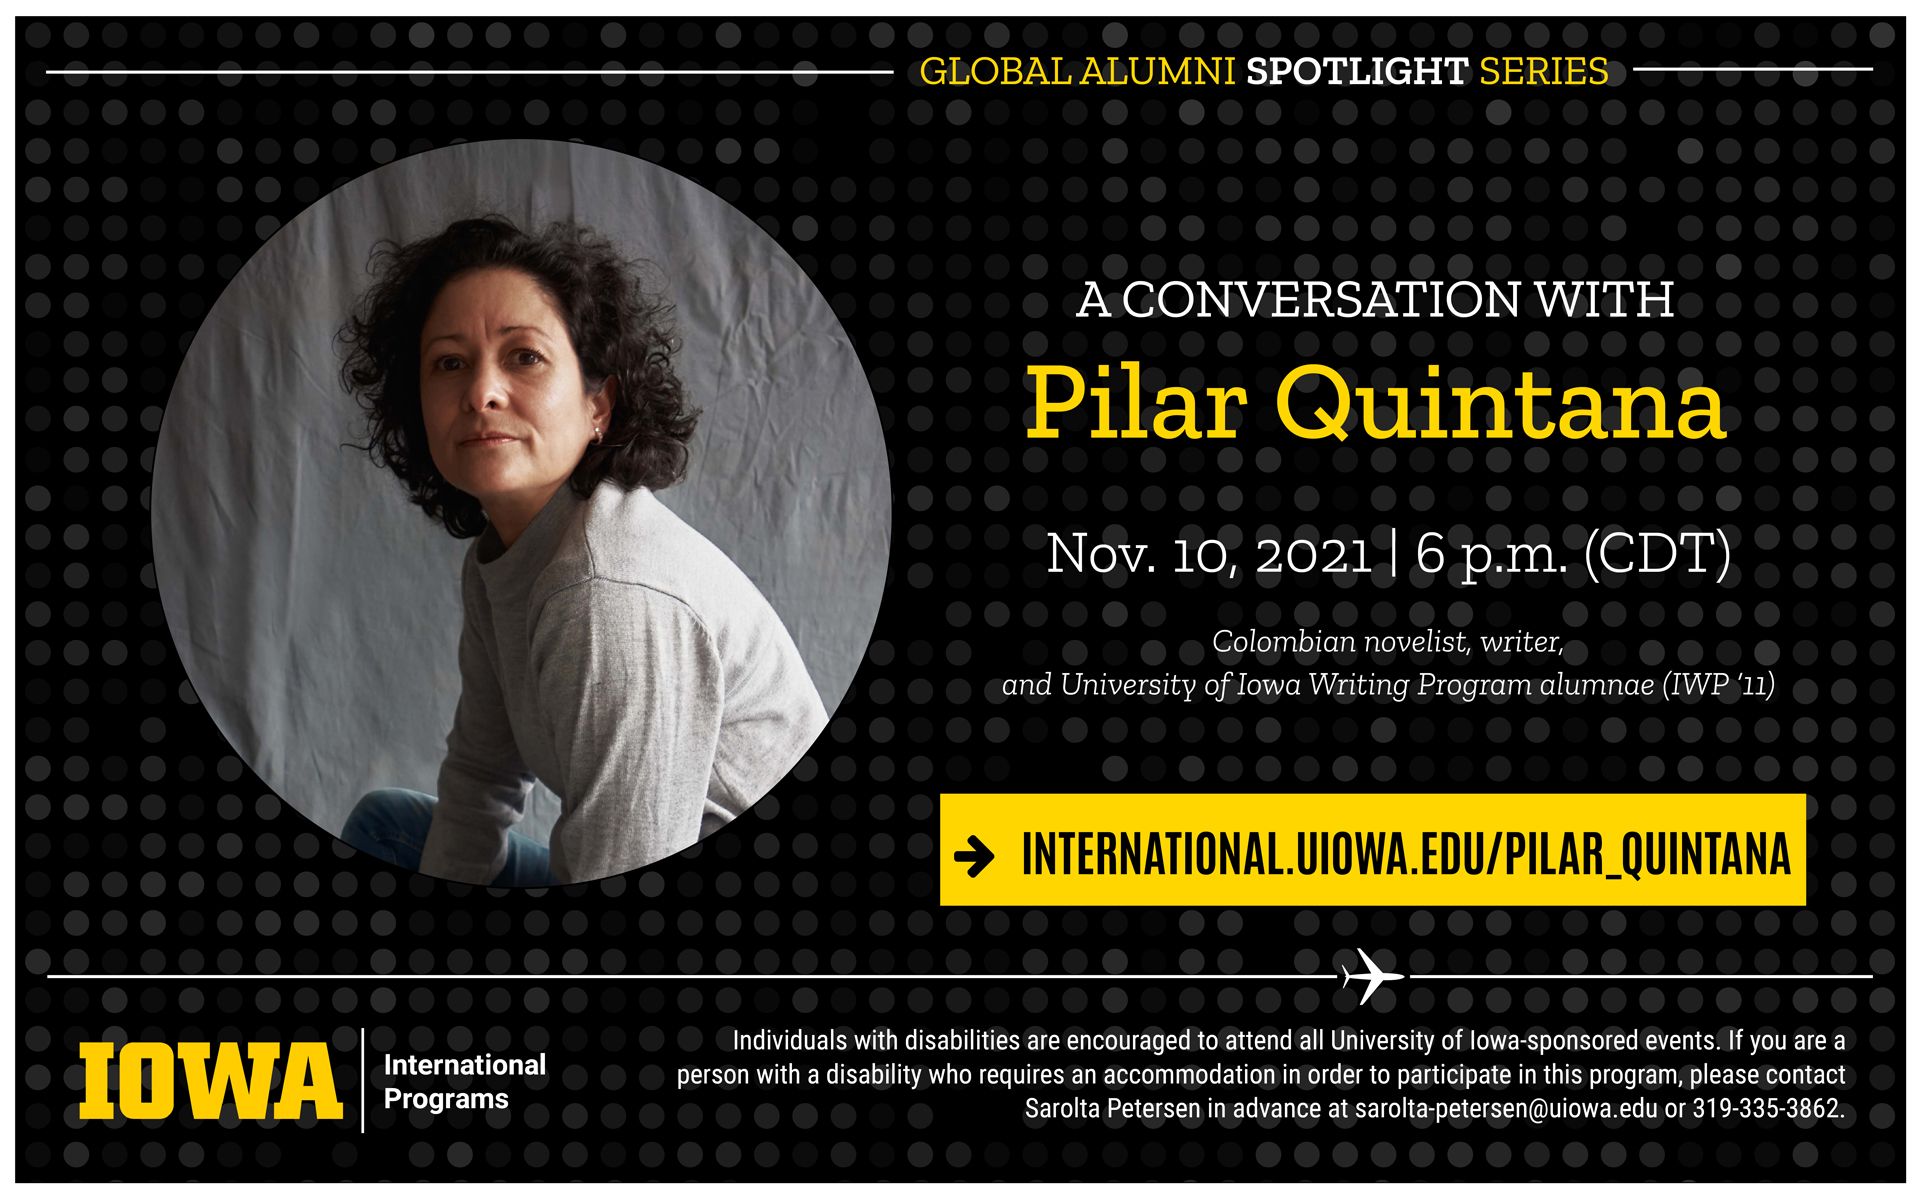 Global alumni spotlight series presents a conversation with Pilar Quintana on November 10 2021 at 6pm CDT. Colombian novelist, writer, and University of Iowa Writing Program alumnae (IWP 11). Find out more at international.uiowa.edu/pilar_quintana Individuals with disabilities are encouraged to attend all University of Iowa-sponsored events. If you are a person with a disability who requires a reasonable accommodation in order to participate in this program, please contact Sarolta Petersen in advance at sarolta-petersen@uiowa.edu.